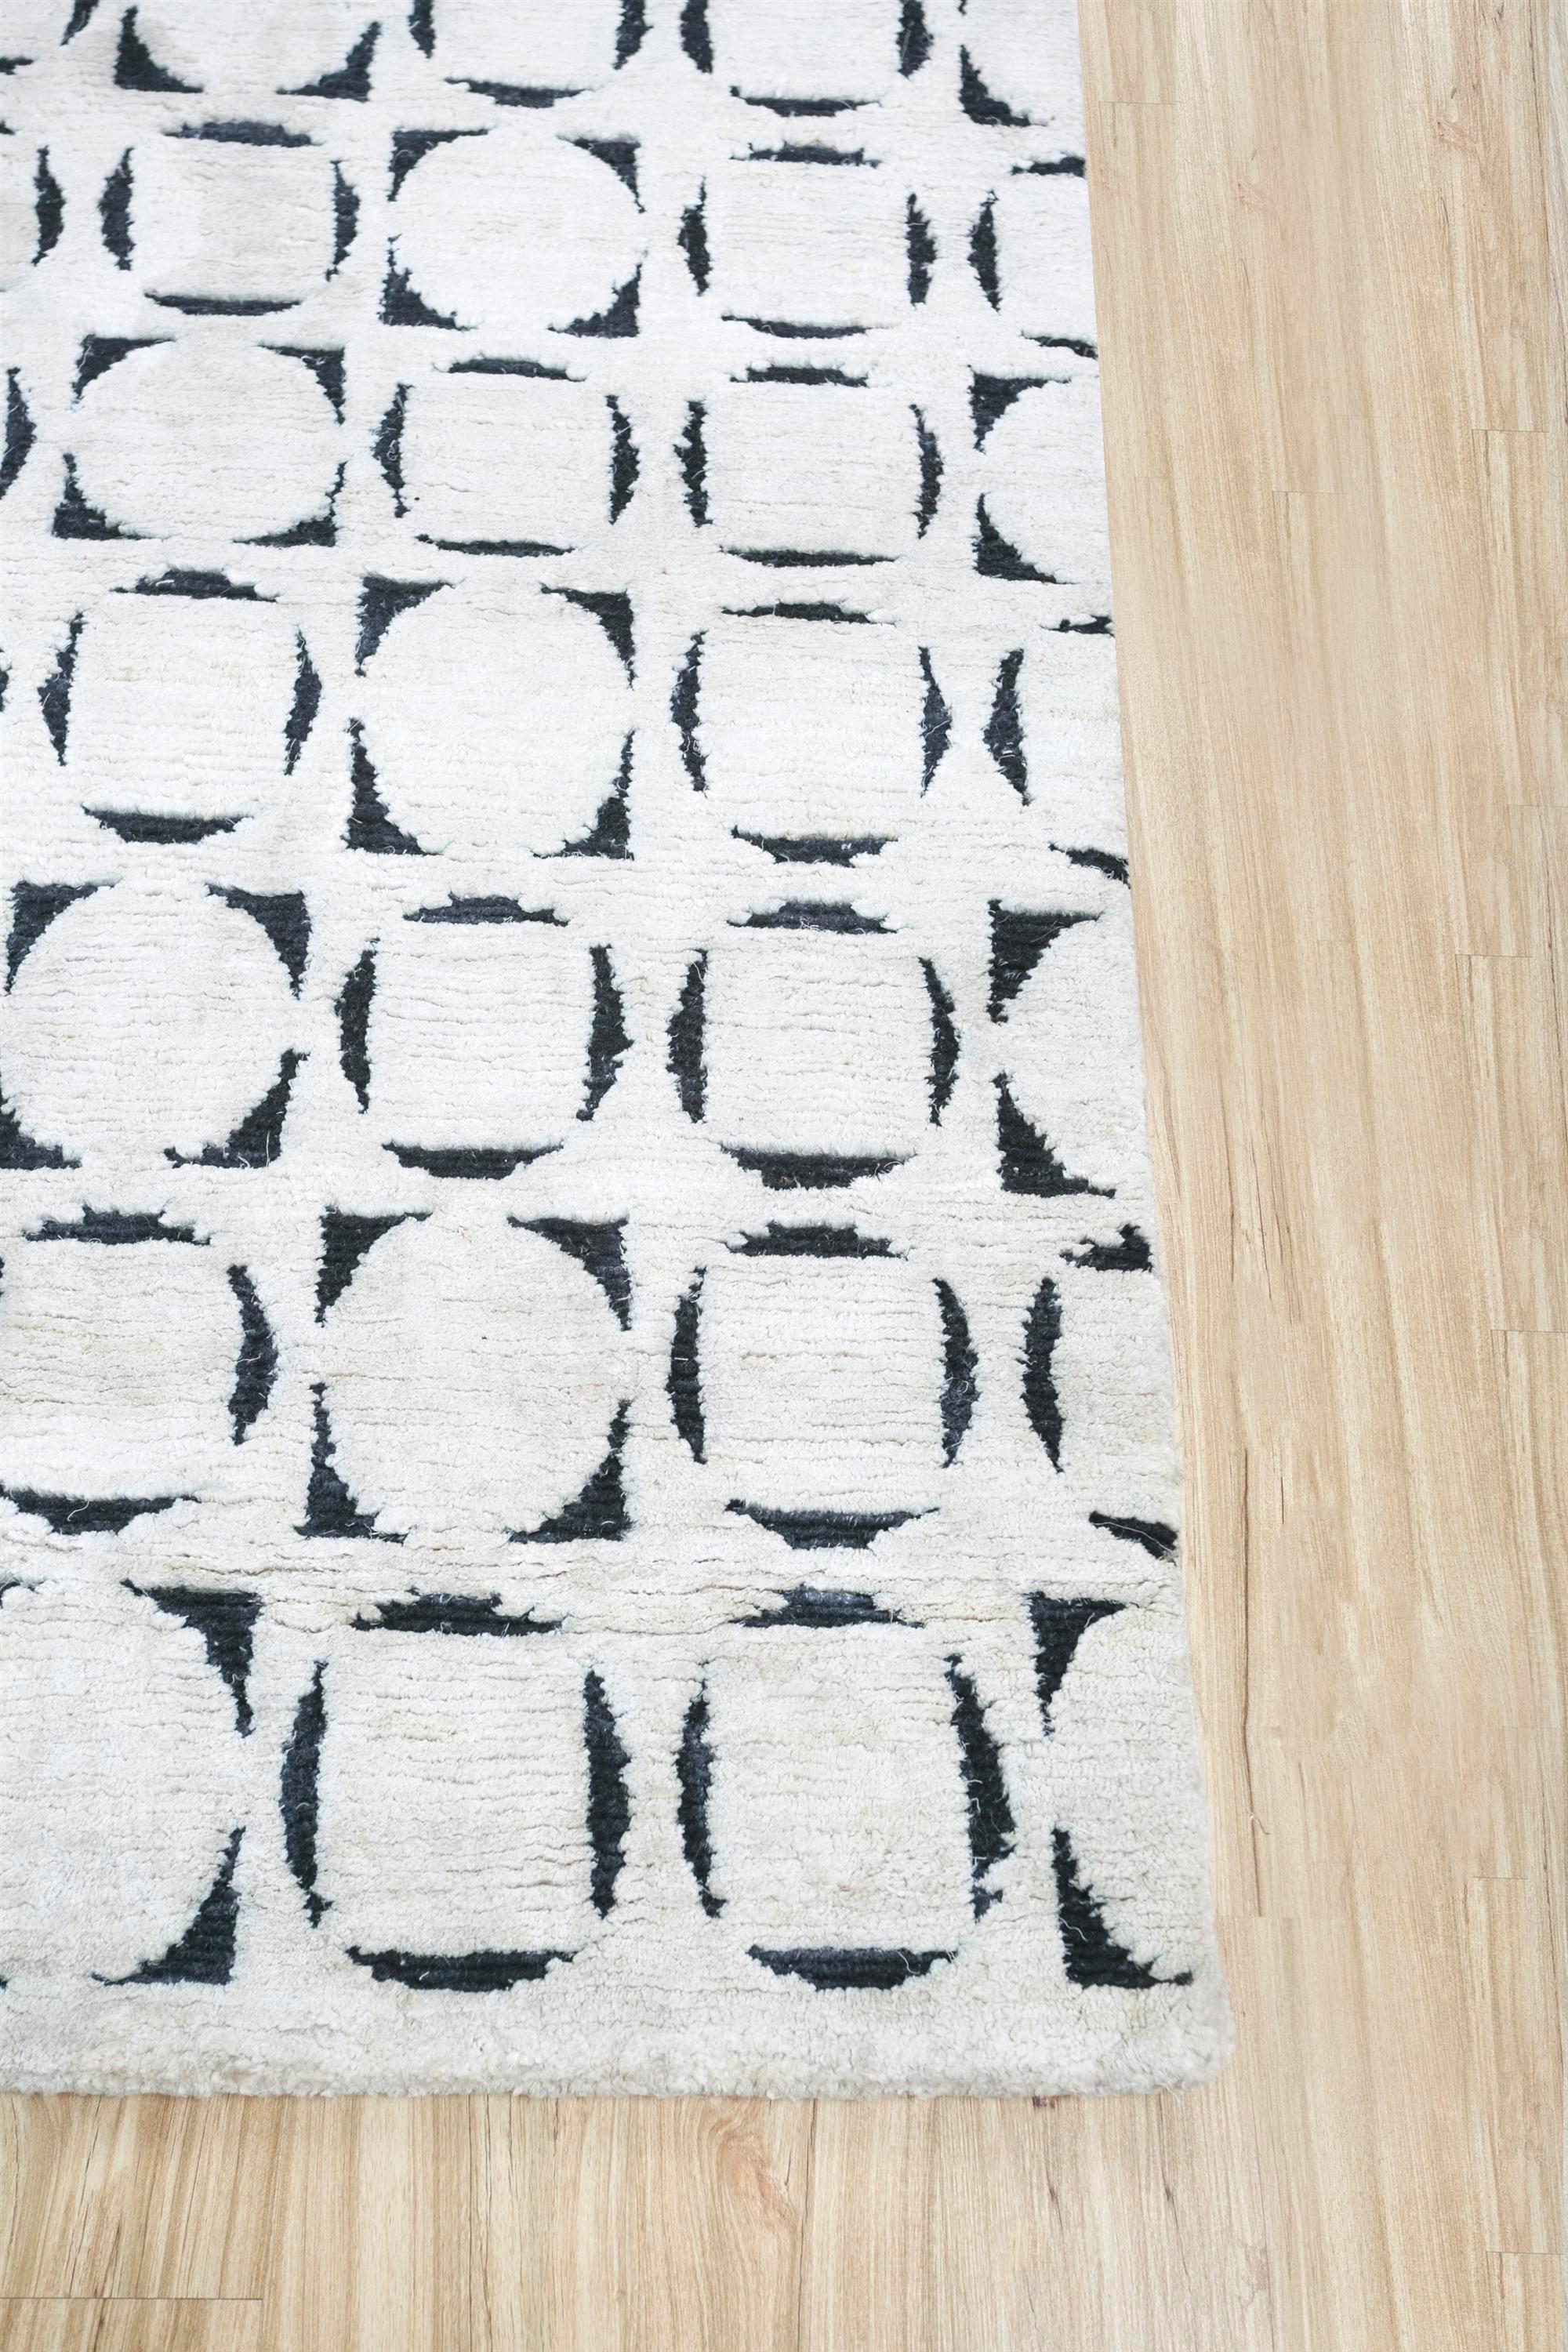 Are you looking for a handmade rug that can be the transformative touch your space craves? Dive into the exquisite allure of this modern hand-knotted rug . Meticulously crafted in rural India, it is enveloped in a soothing tone-on-tone palette. Its